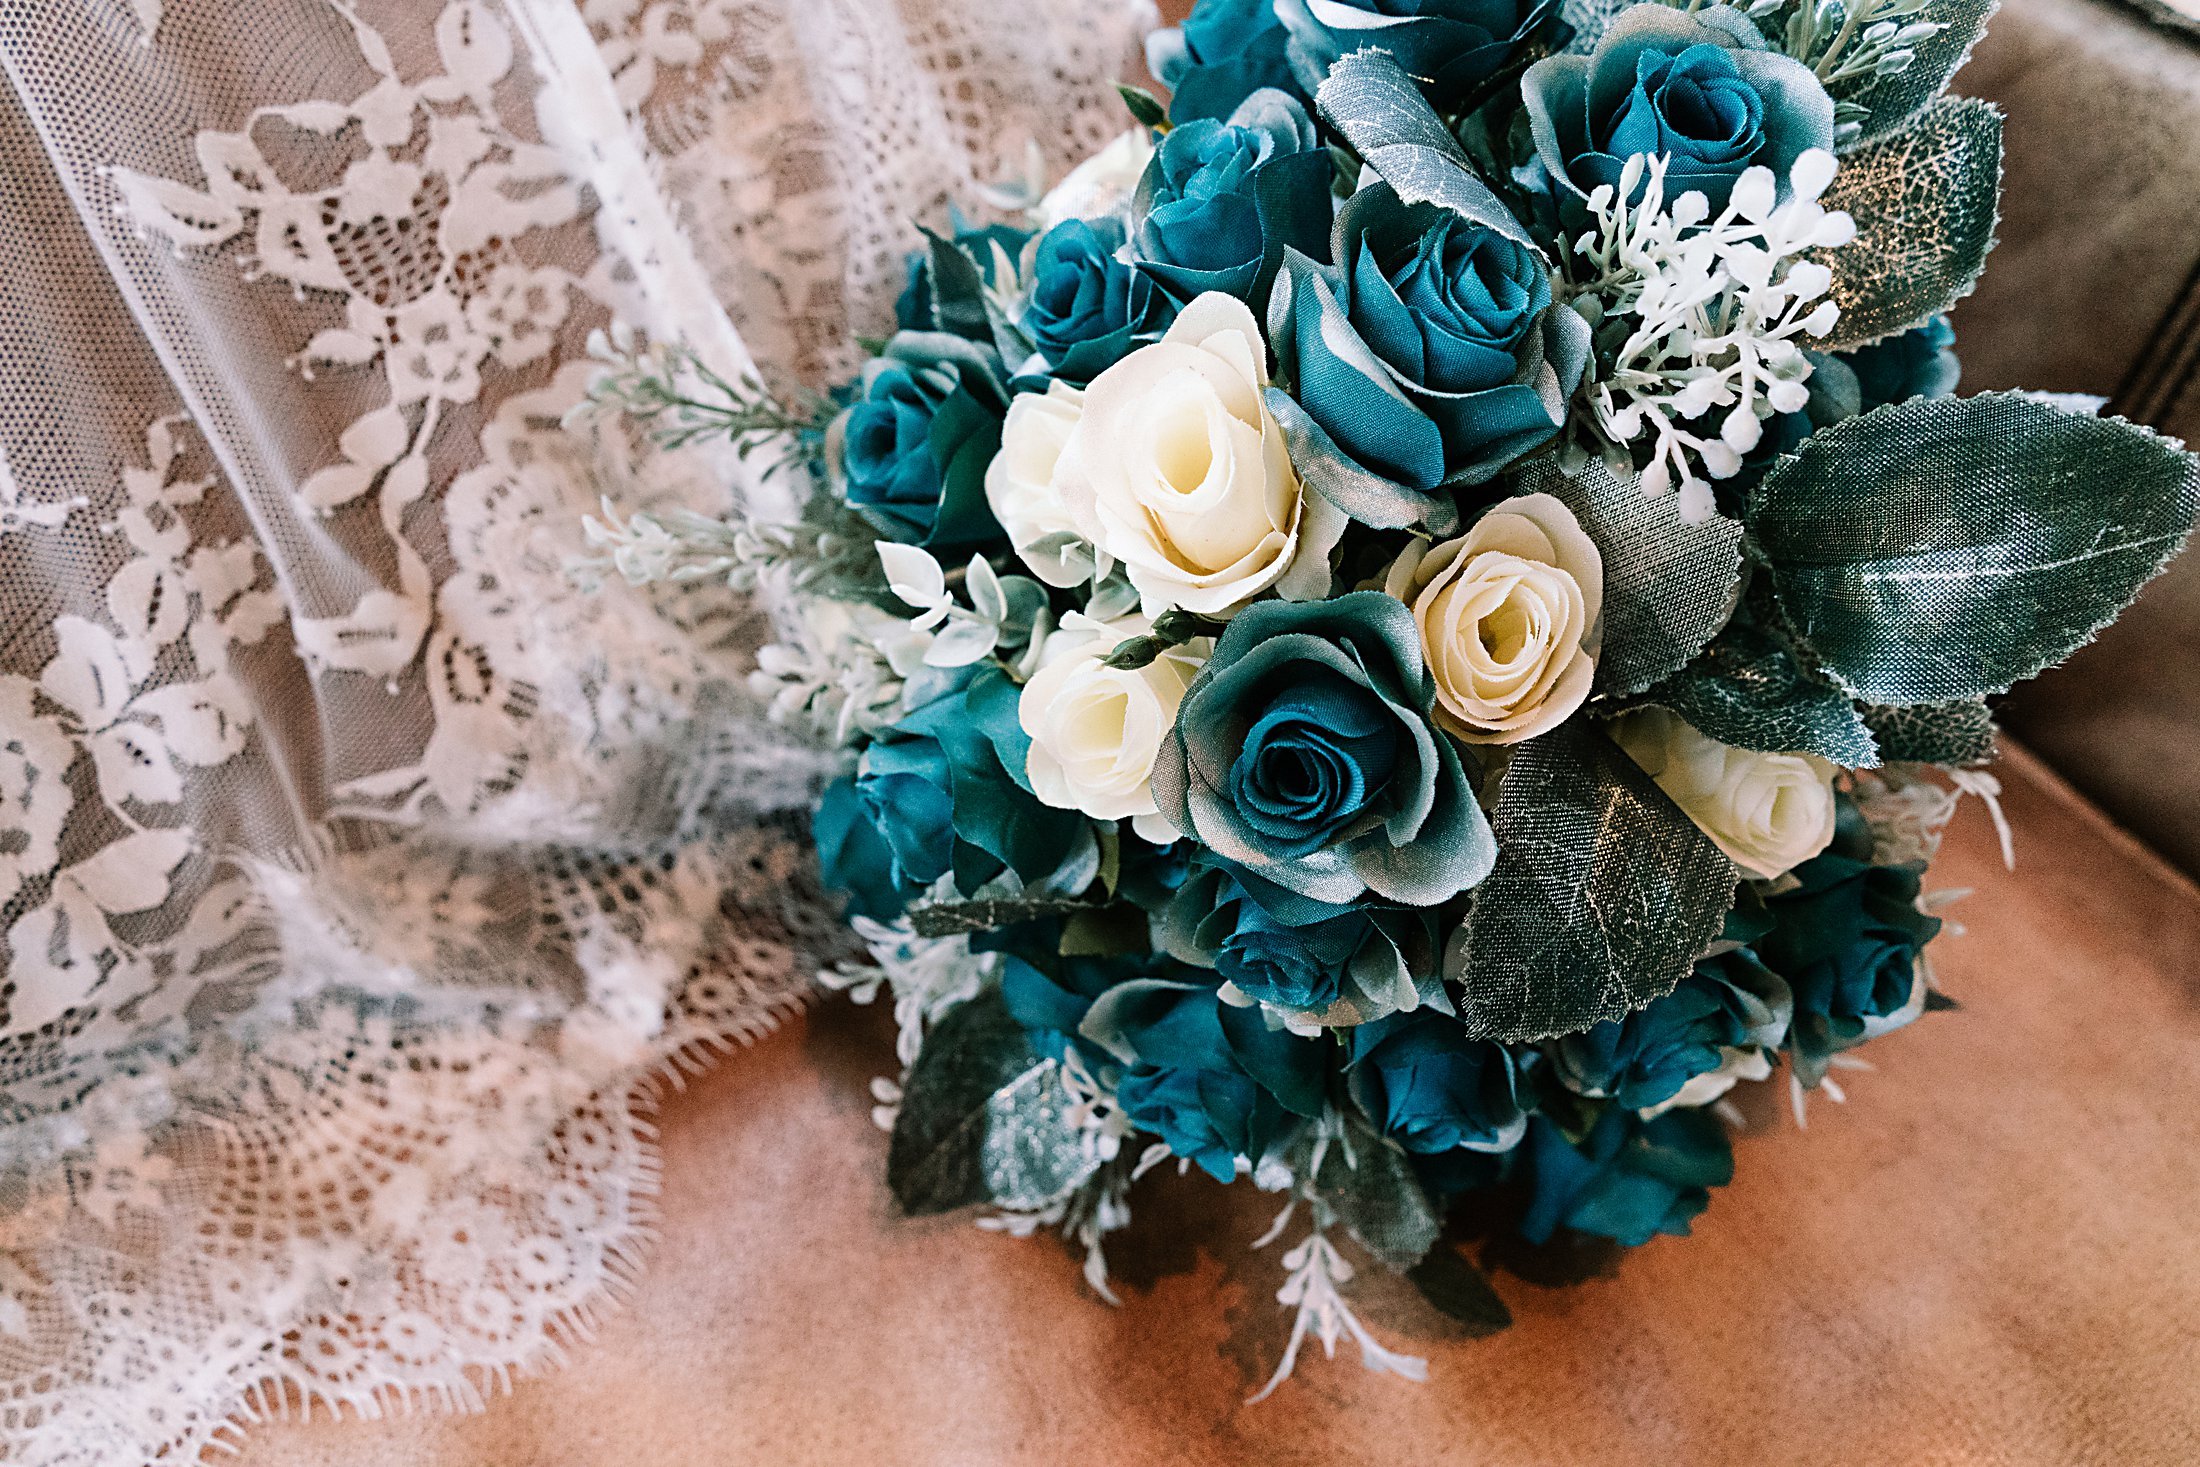 Teal flowers and lace wedding dress